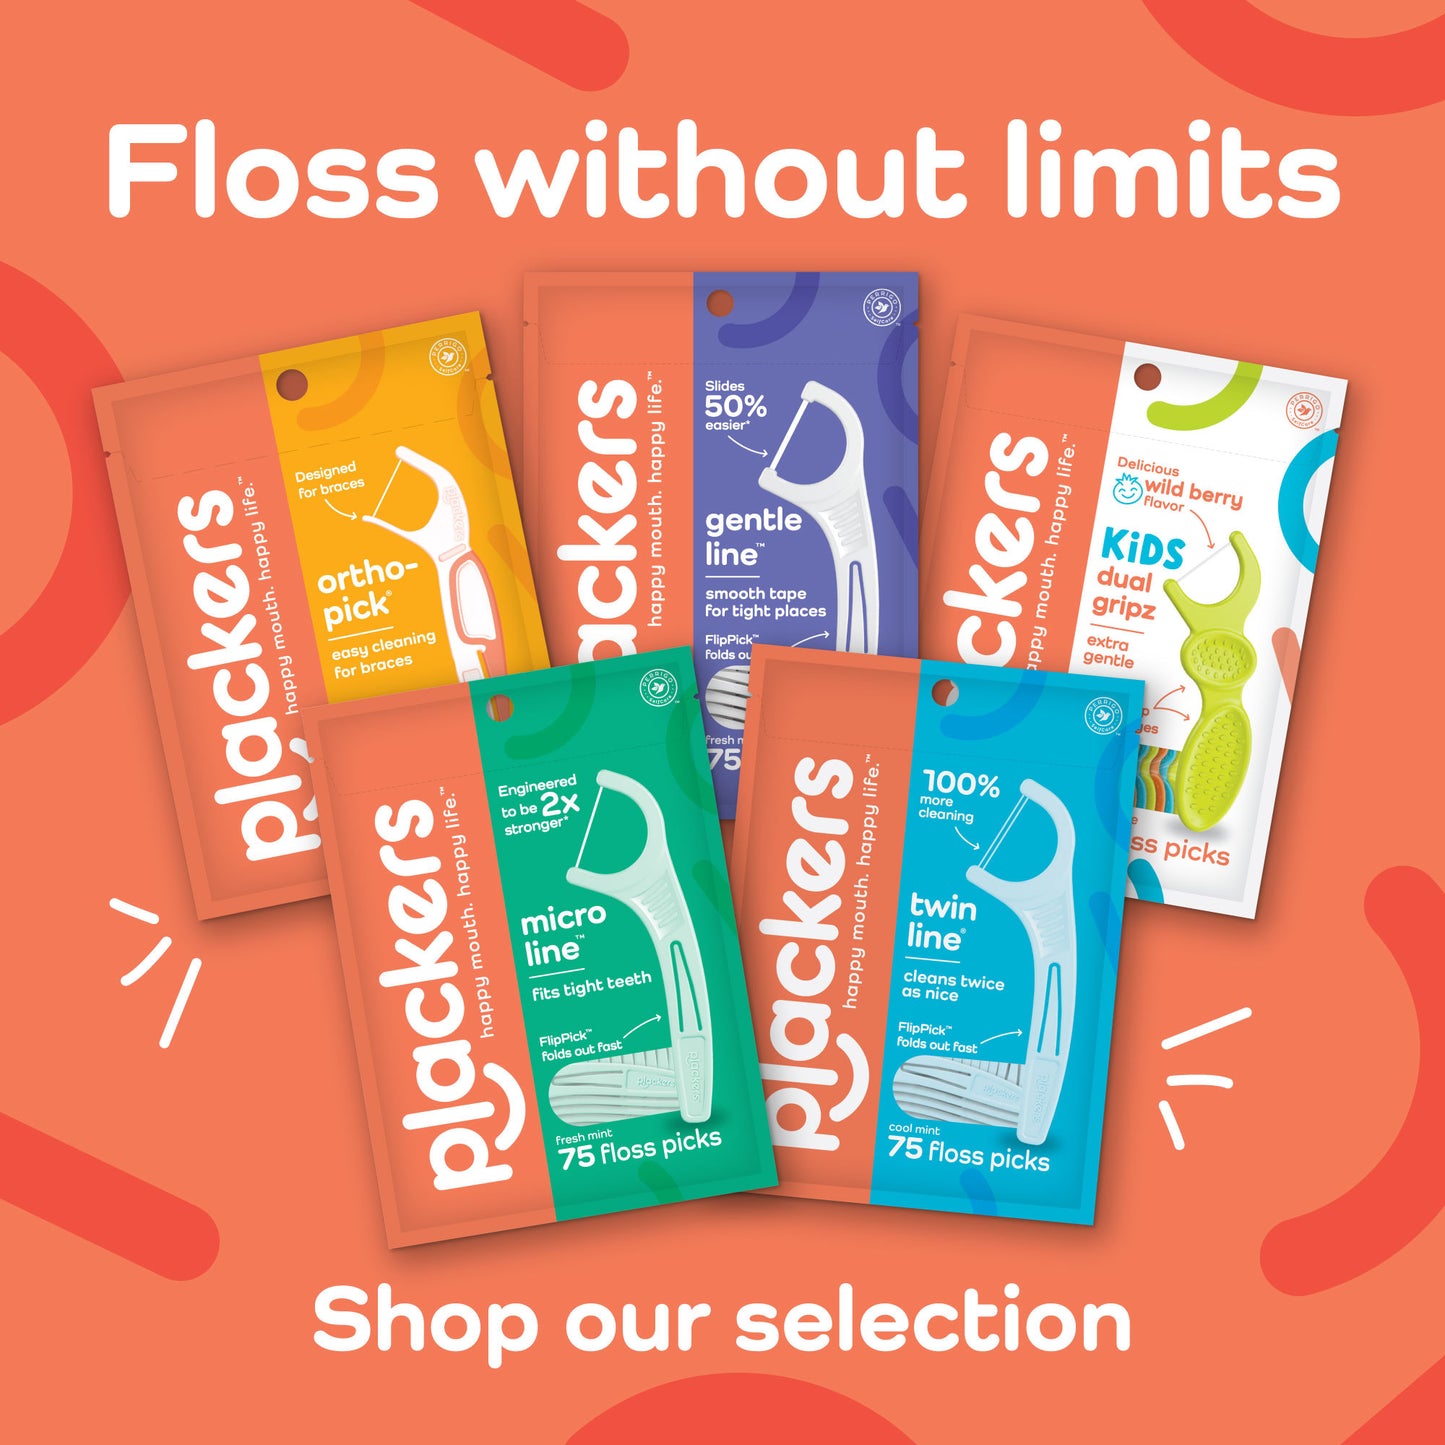 Floss without limits. Shop our selection